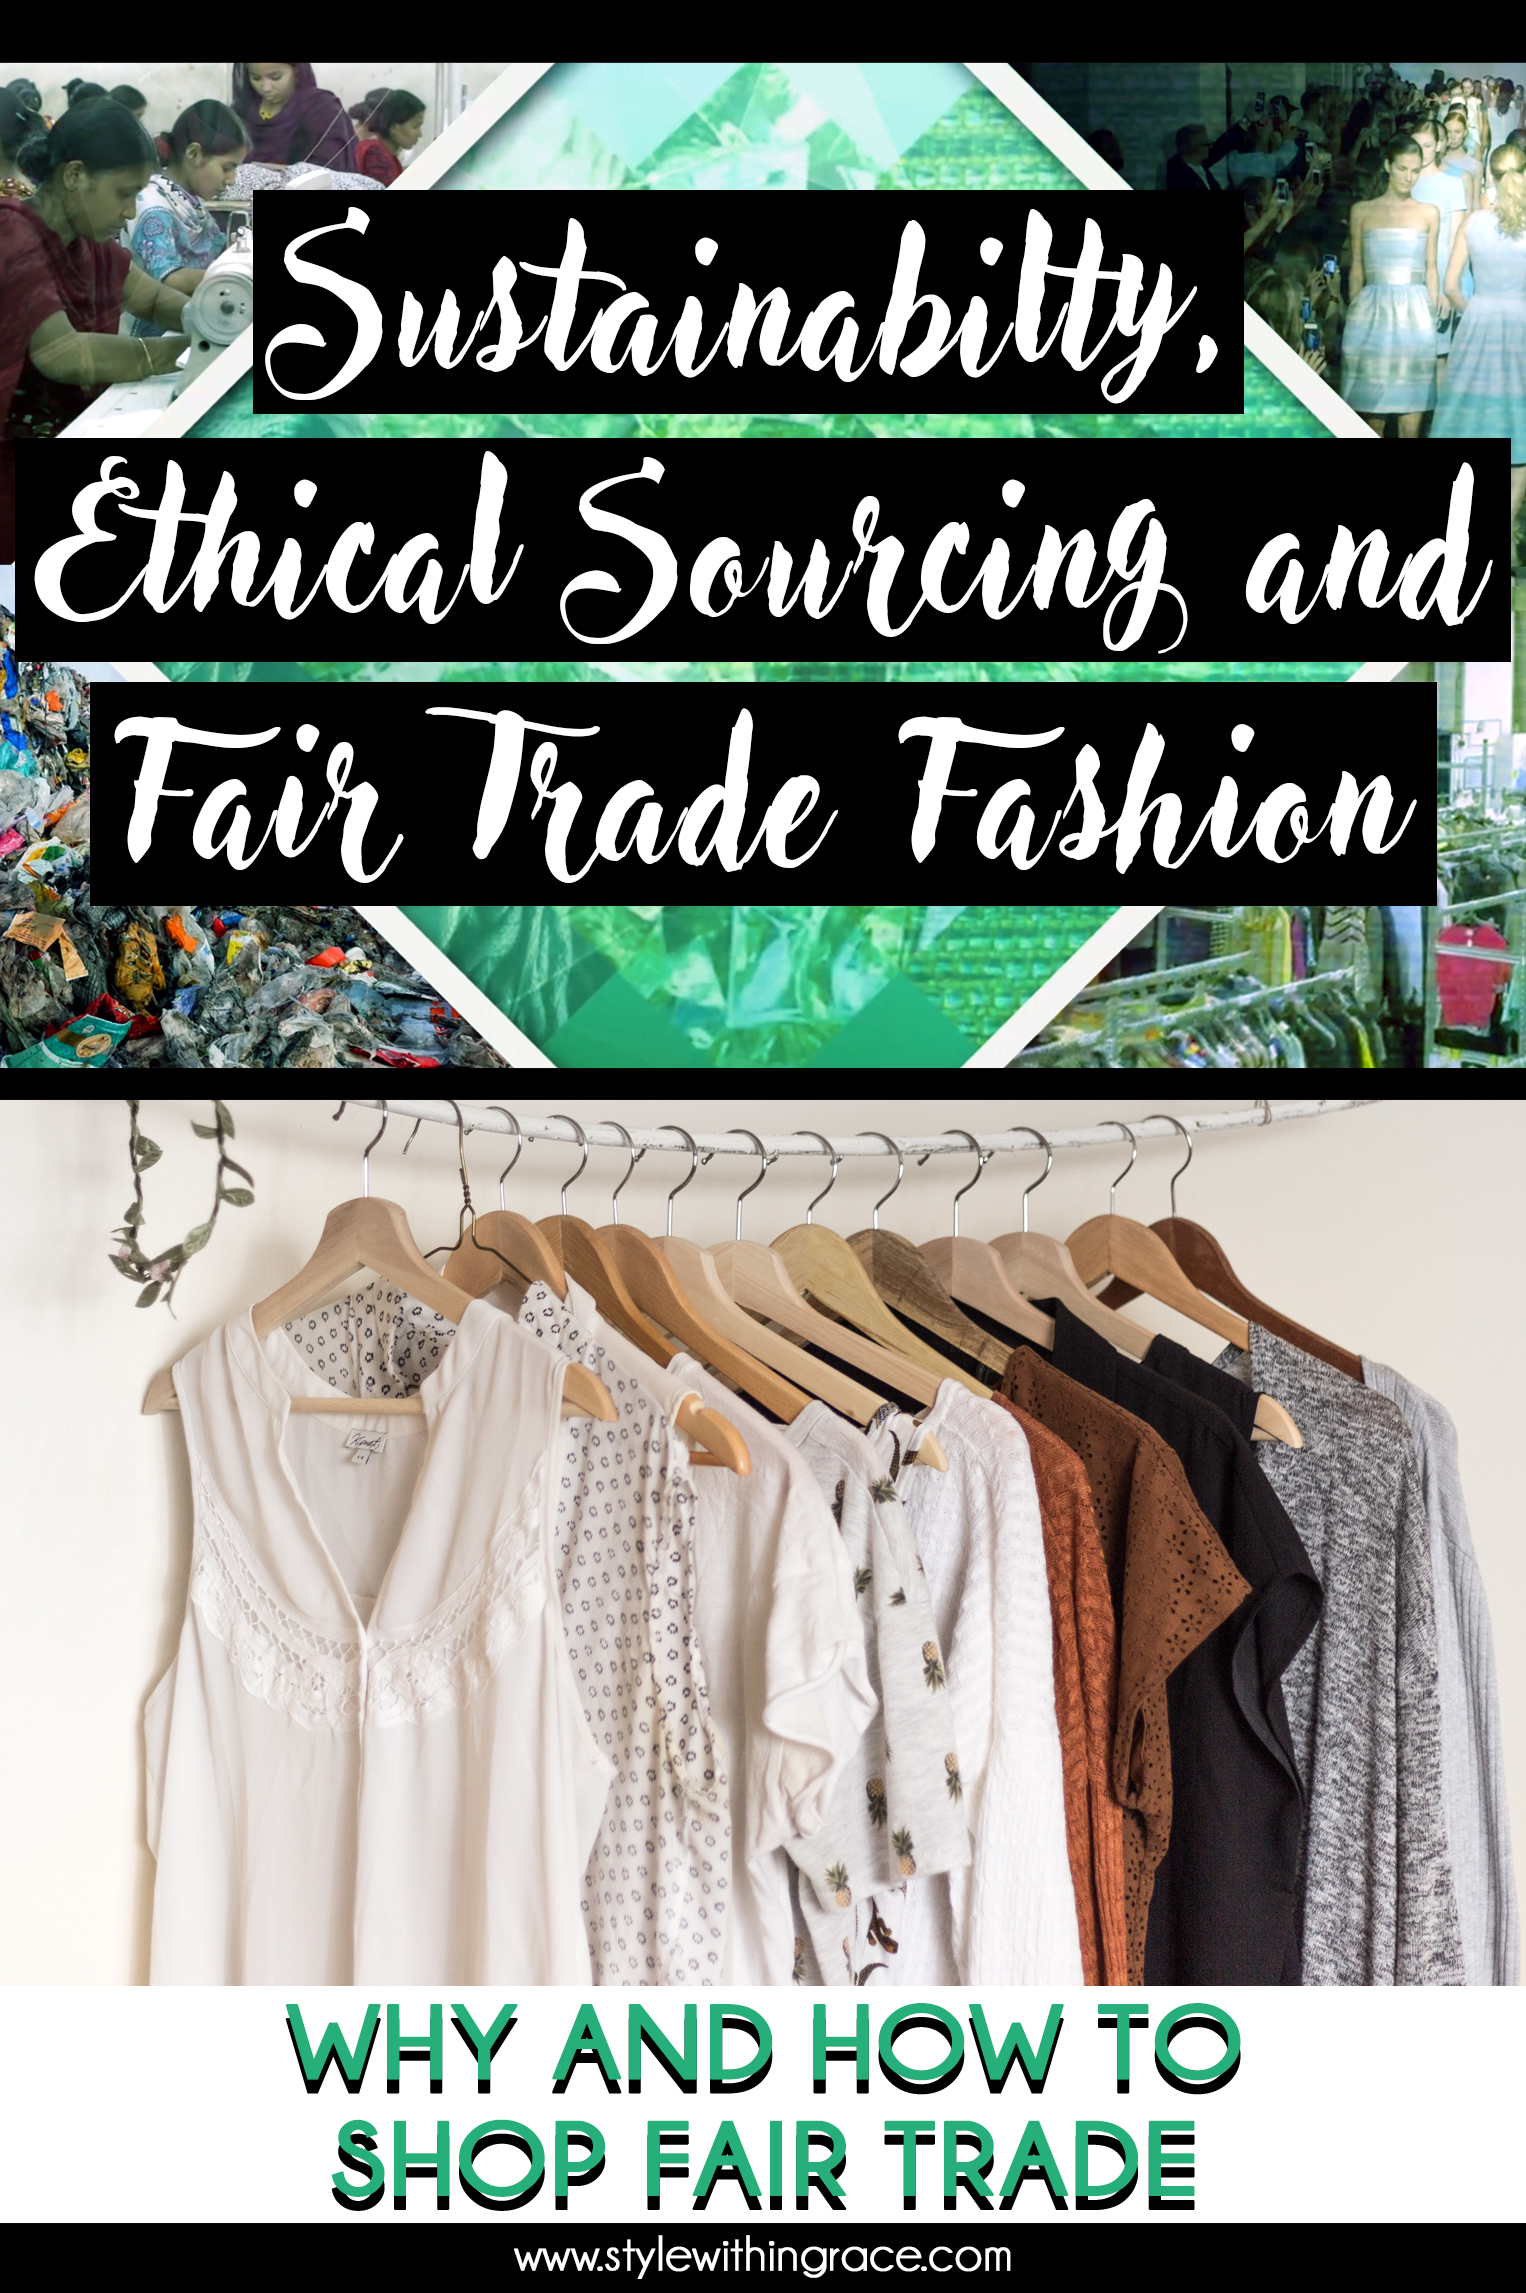 Sustainable and Ethical Fashion - Style Within Grace